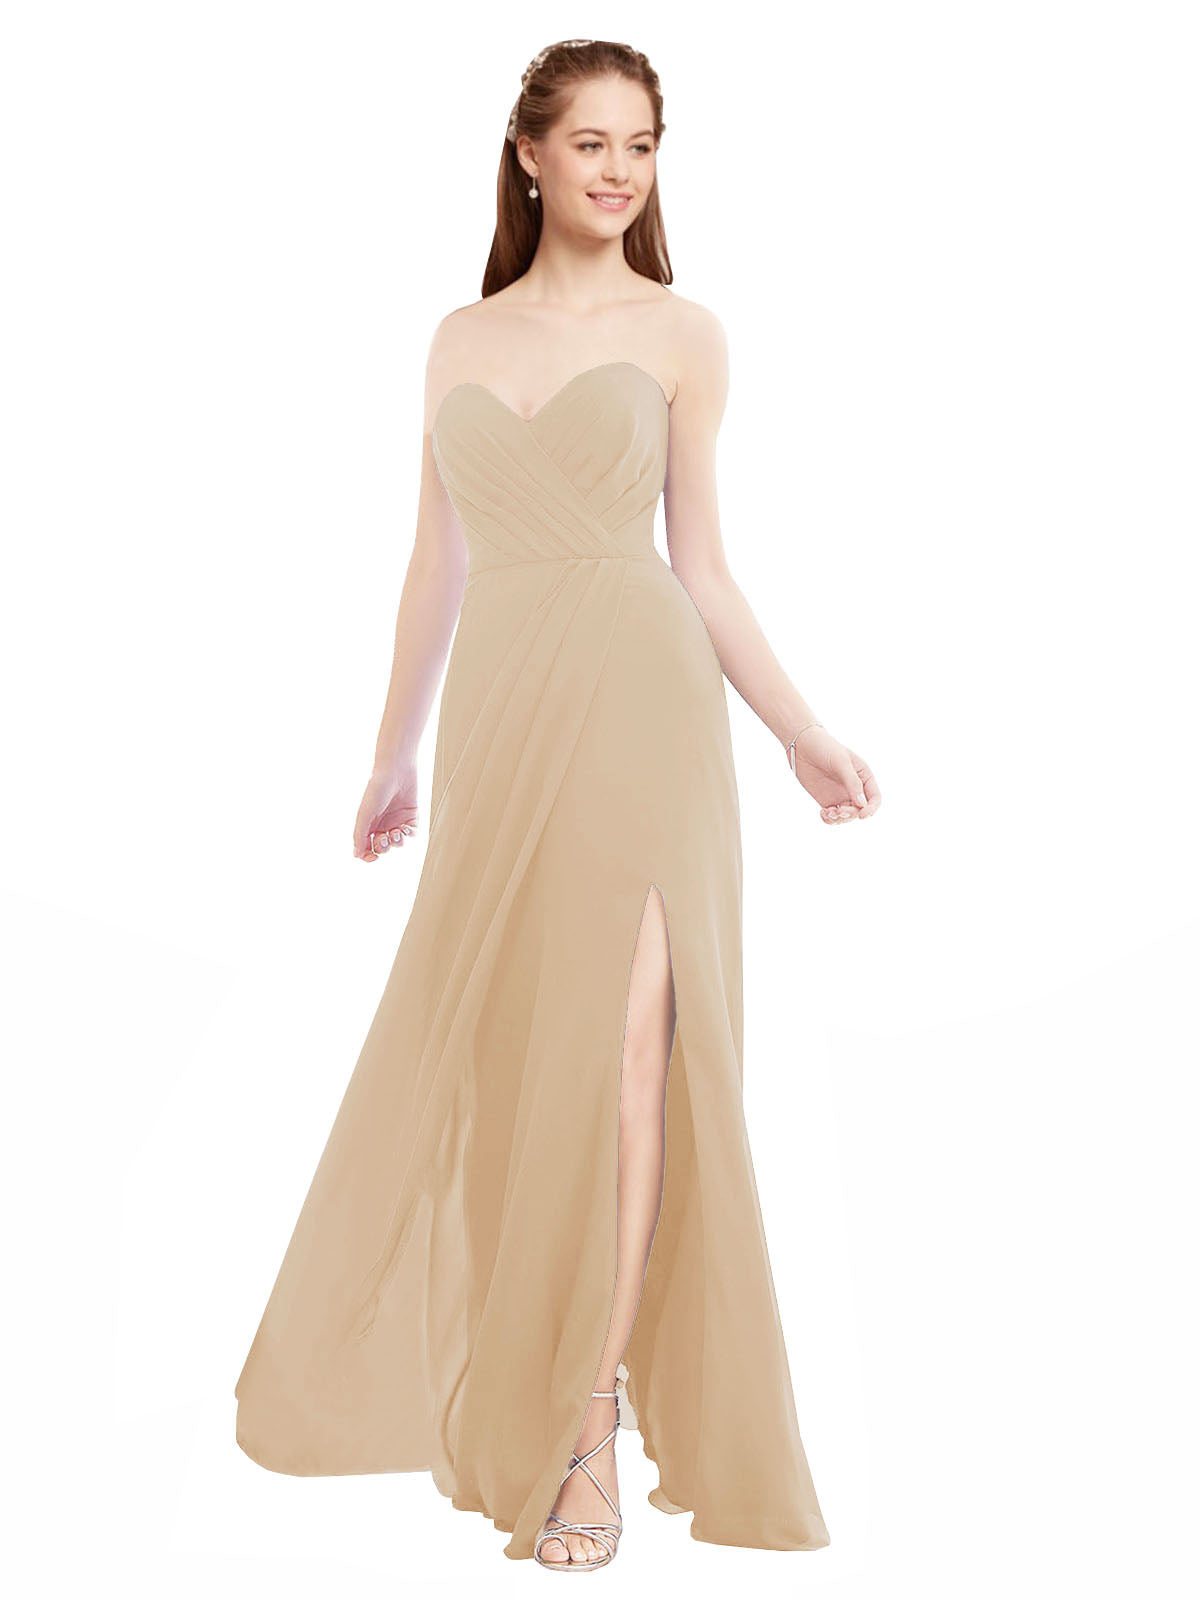 Champagne A-Line Sweetheart Strapless Sleeveless Long Bridesmaid Dress Meadow